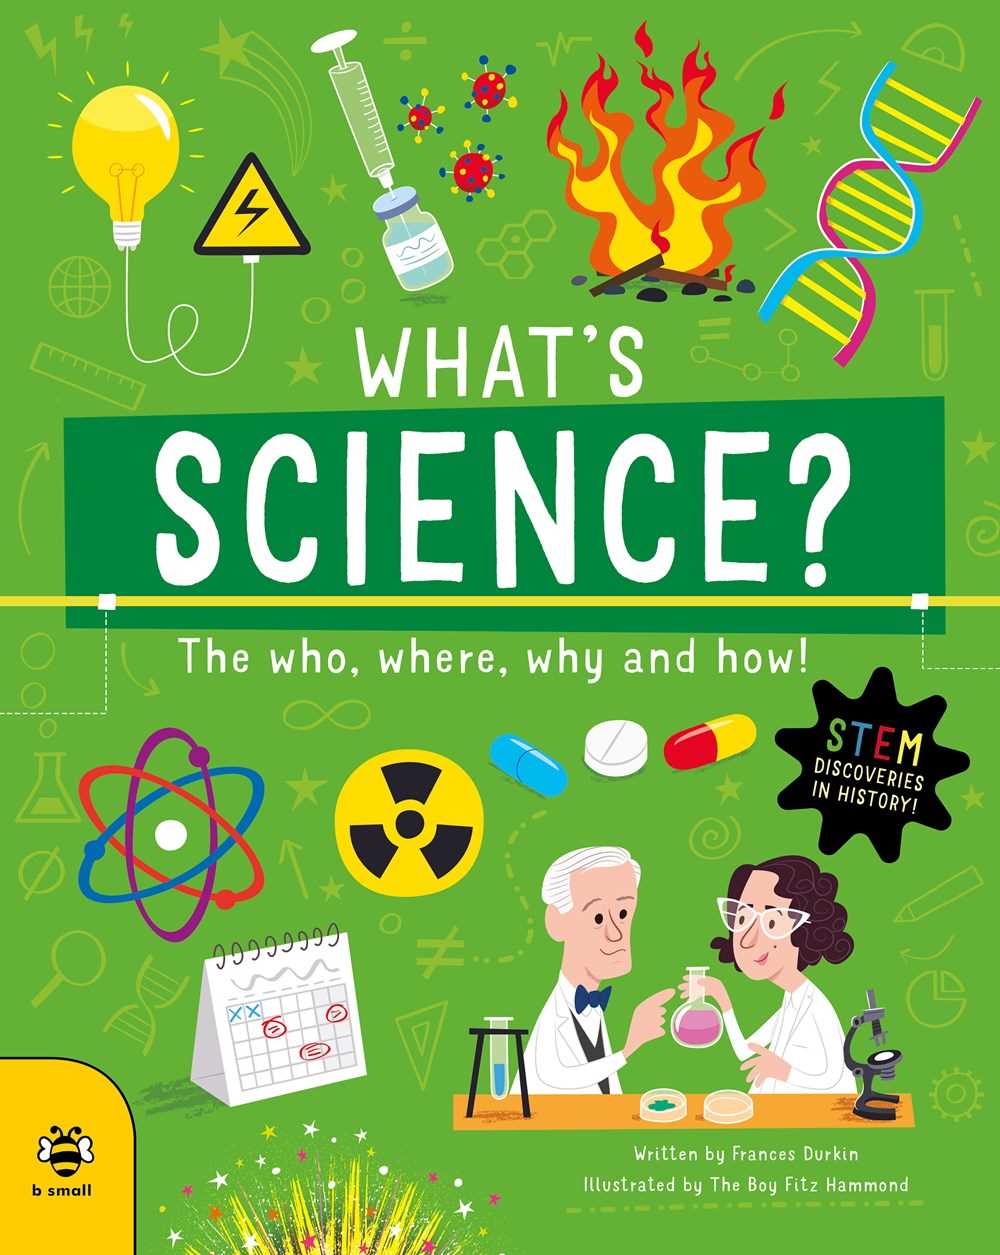 What's Science? (Discoveries and Inventions)